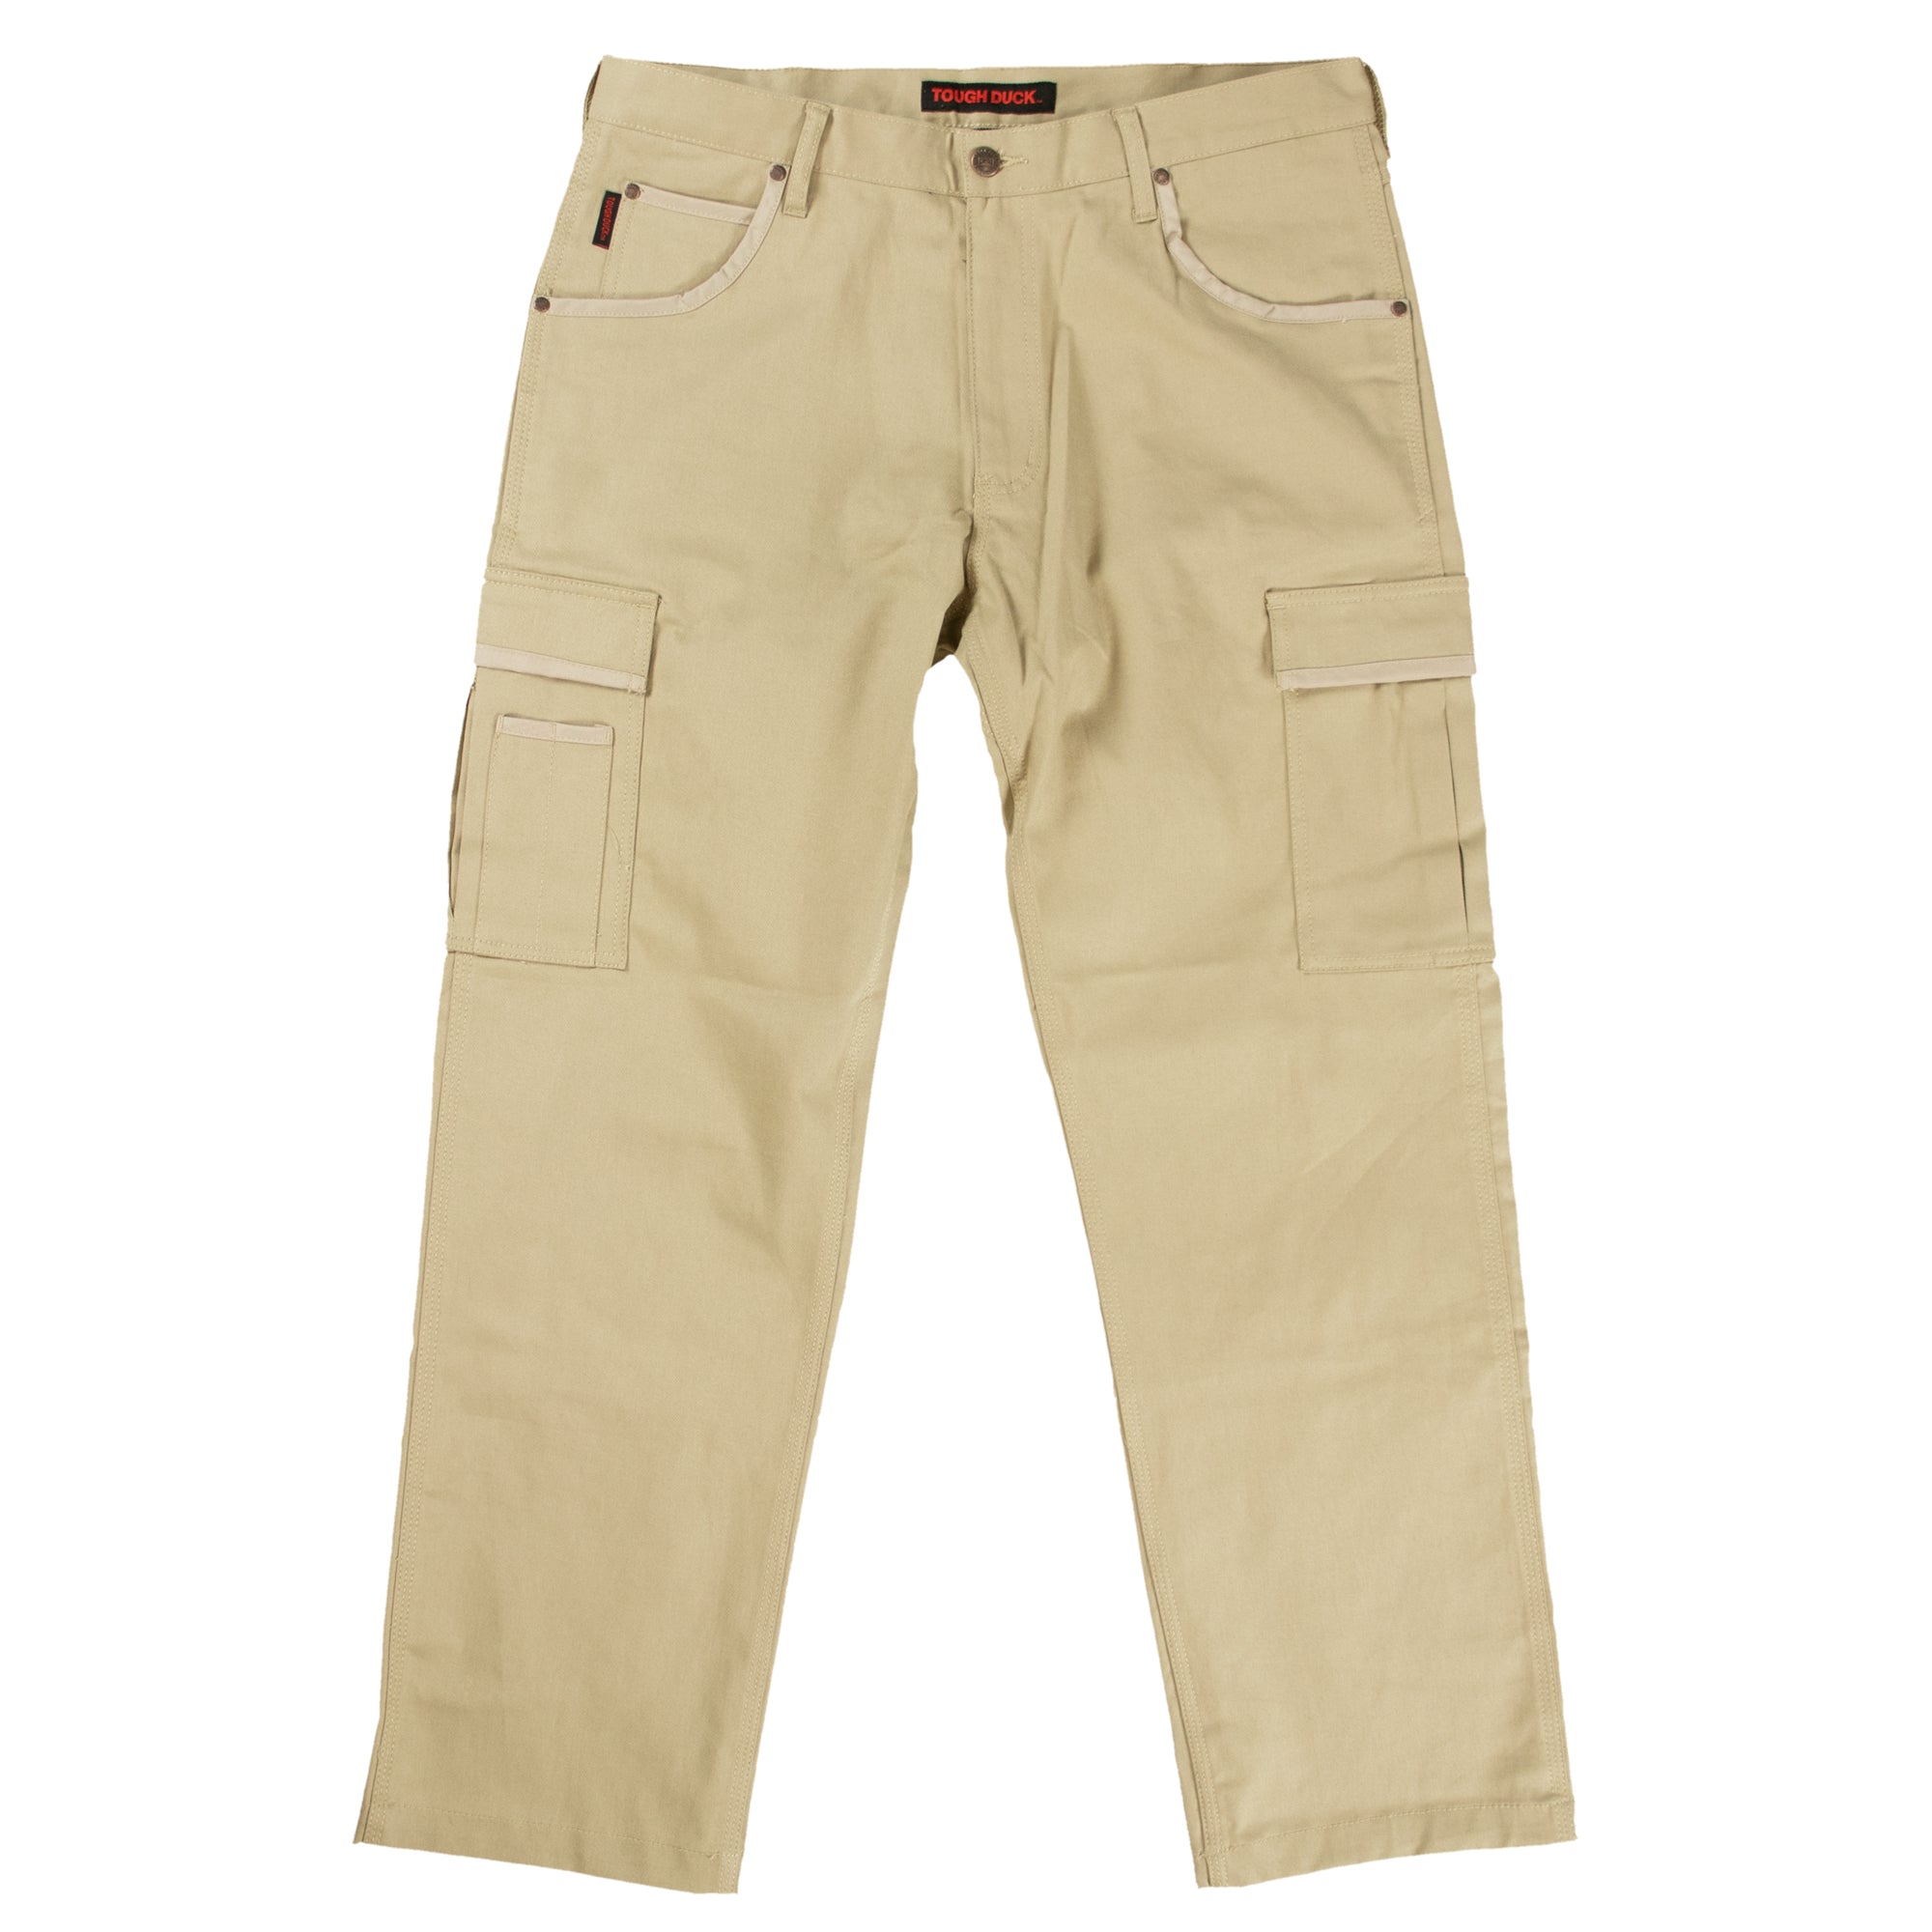 SPANX - NEW & TRENDING: Stretch Twill Cargo Pants! Yes